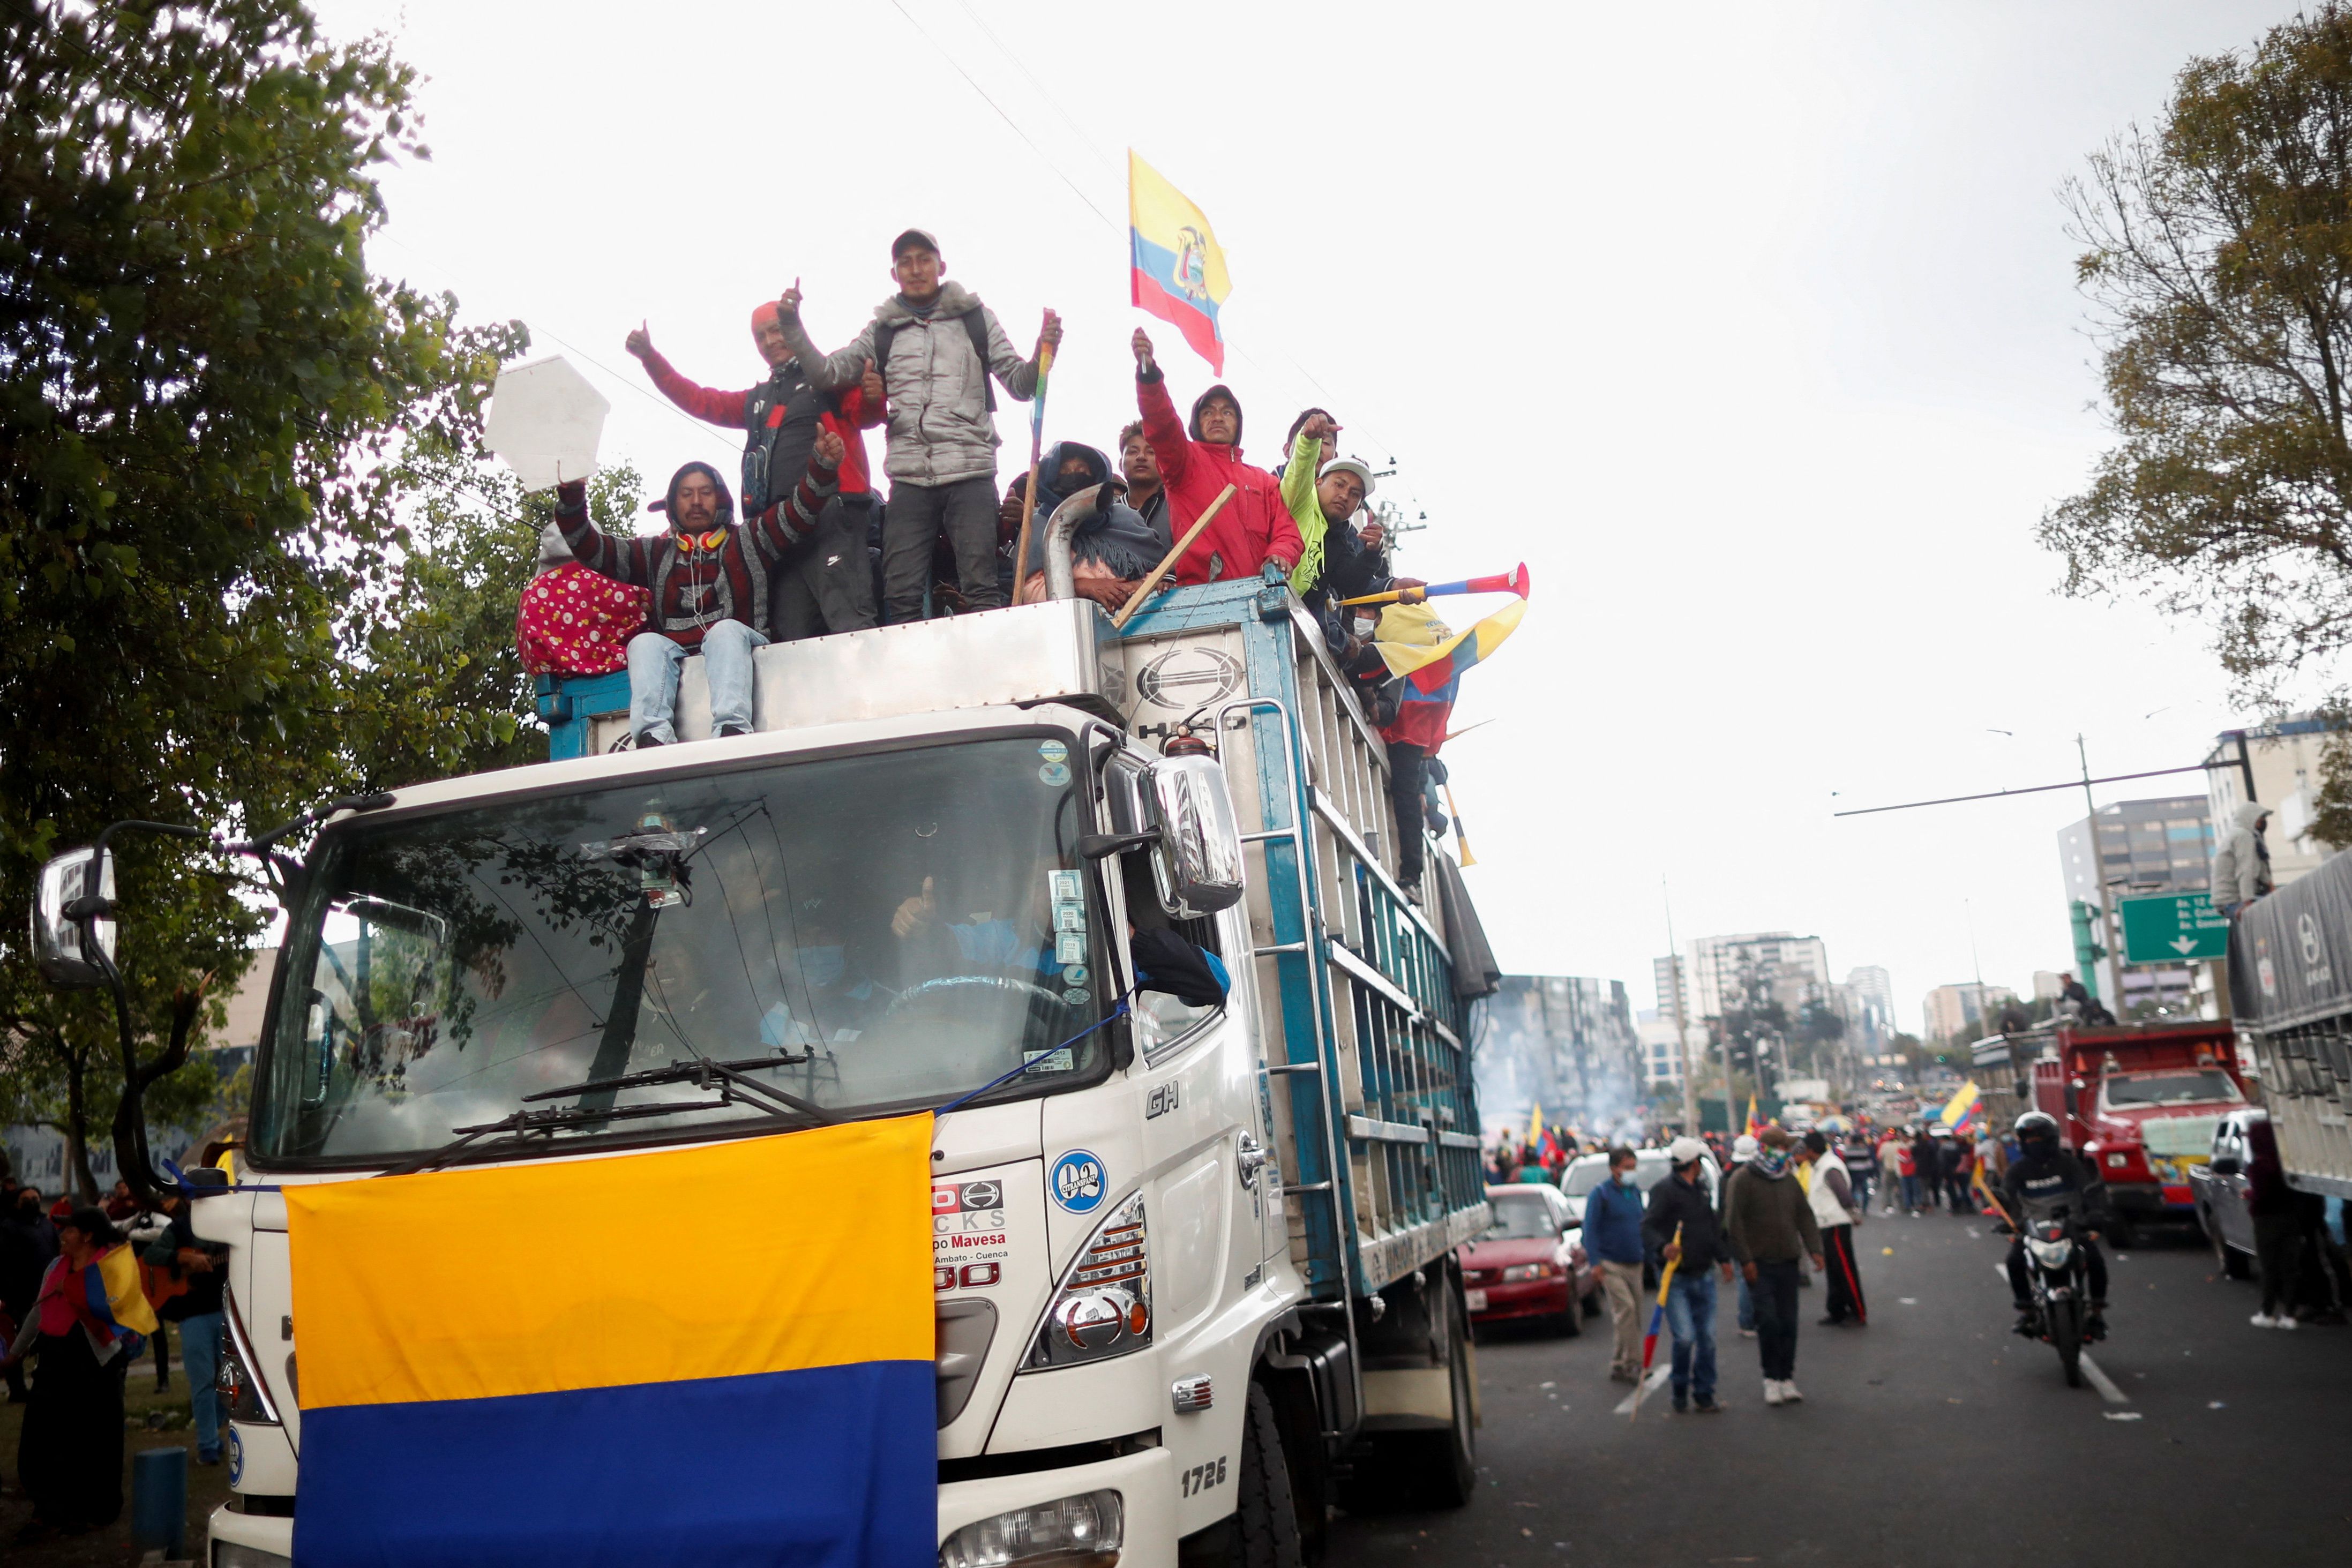 People celebrate after the signing of an agreement between indigenous organizations and the Ecuadorian government, in Quito, Ecuador.